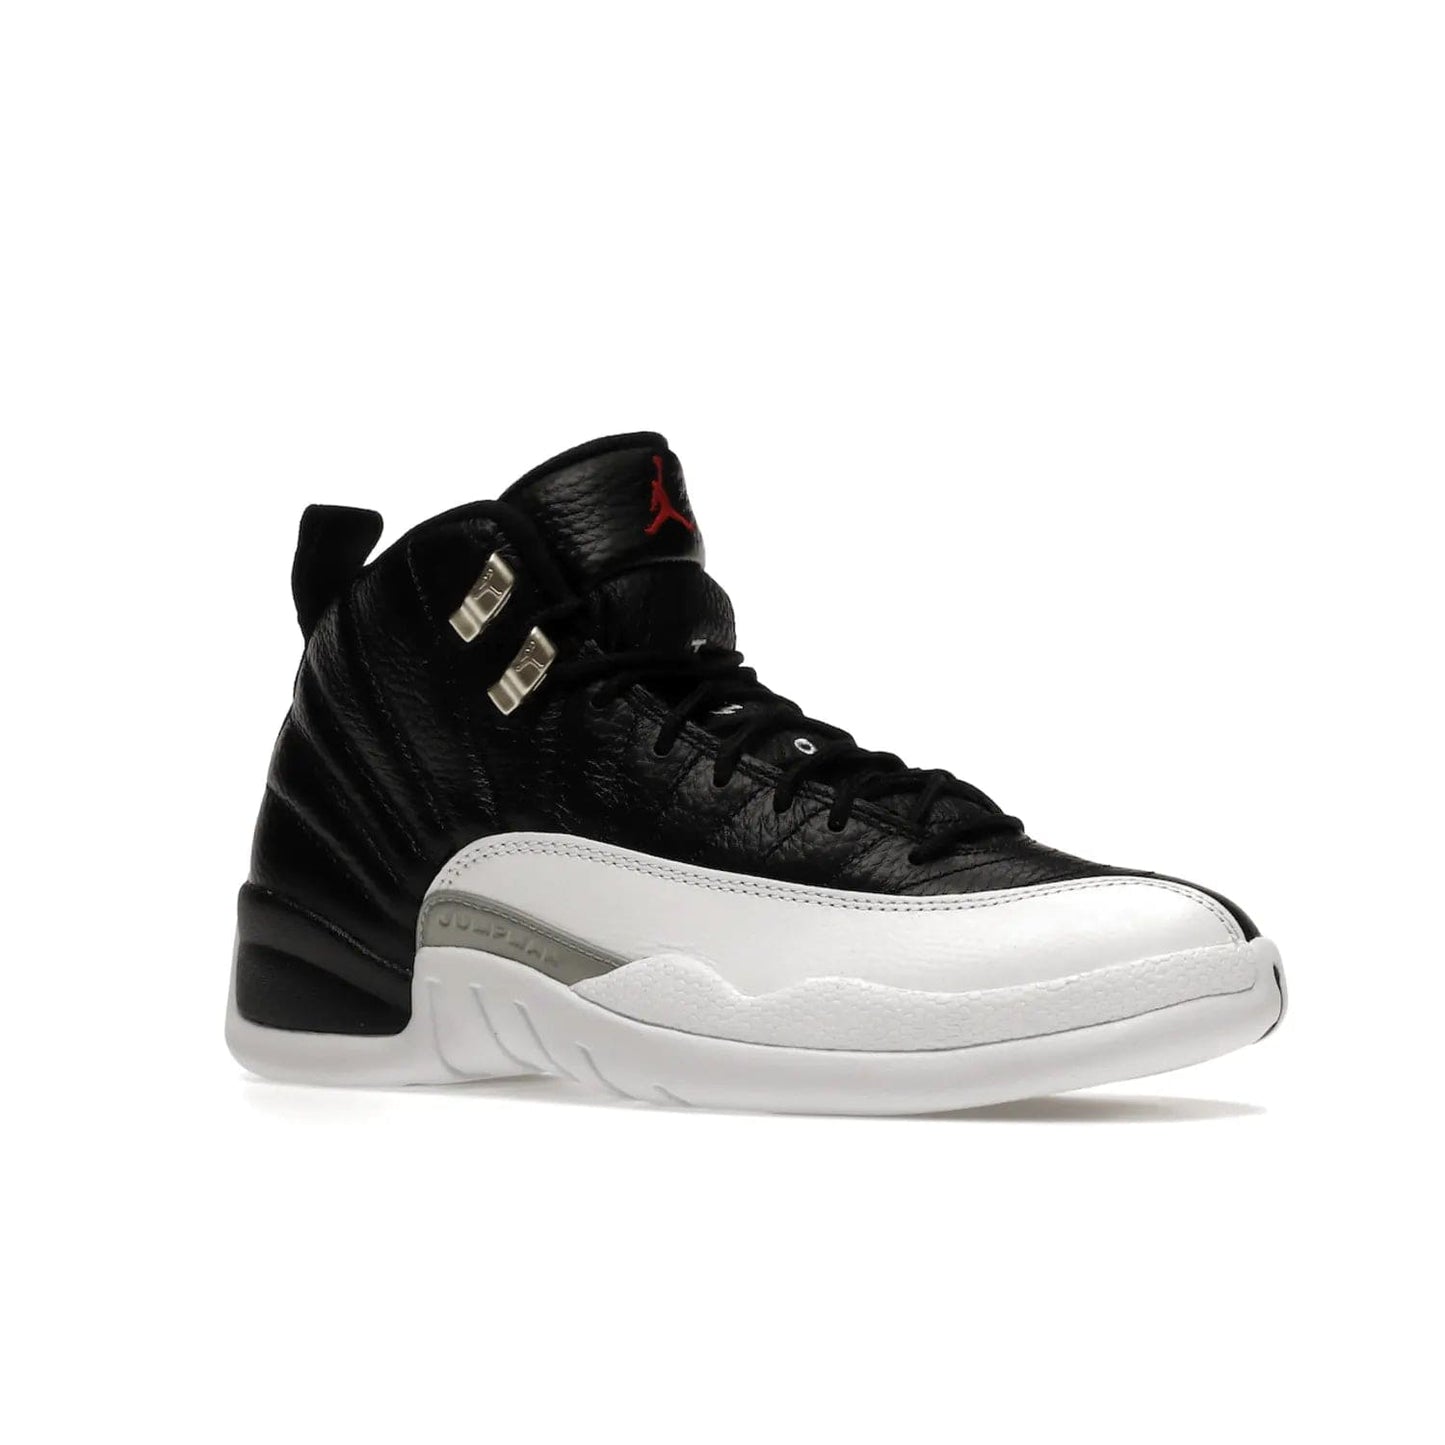 Jordan 12 Retro Playoffs (2022) - Image 4 - Only at www.BallersClubKickz.com - Retro Air Jordan 12 Playoffs. Celebrate 25 years with MJ's iconic shoe. Black tumbled leather upper, white sole with carbon fiber detailing and Jumpman embroidery. Must-have for any Jordan shoe fan. Releases March 2022.